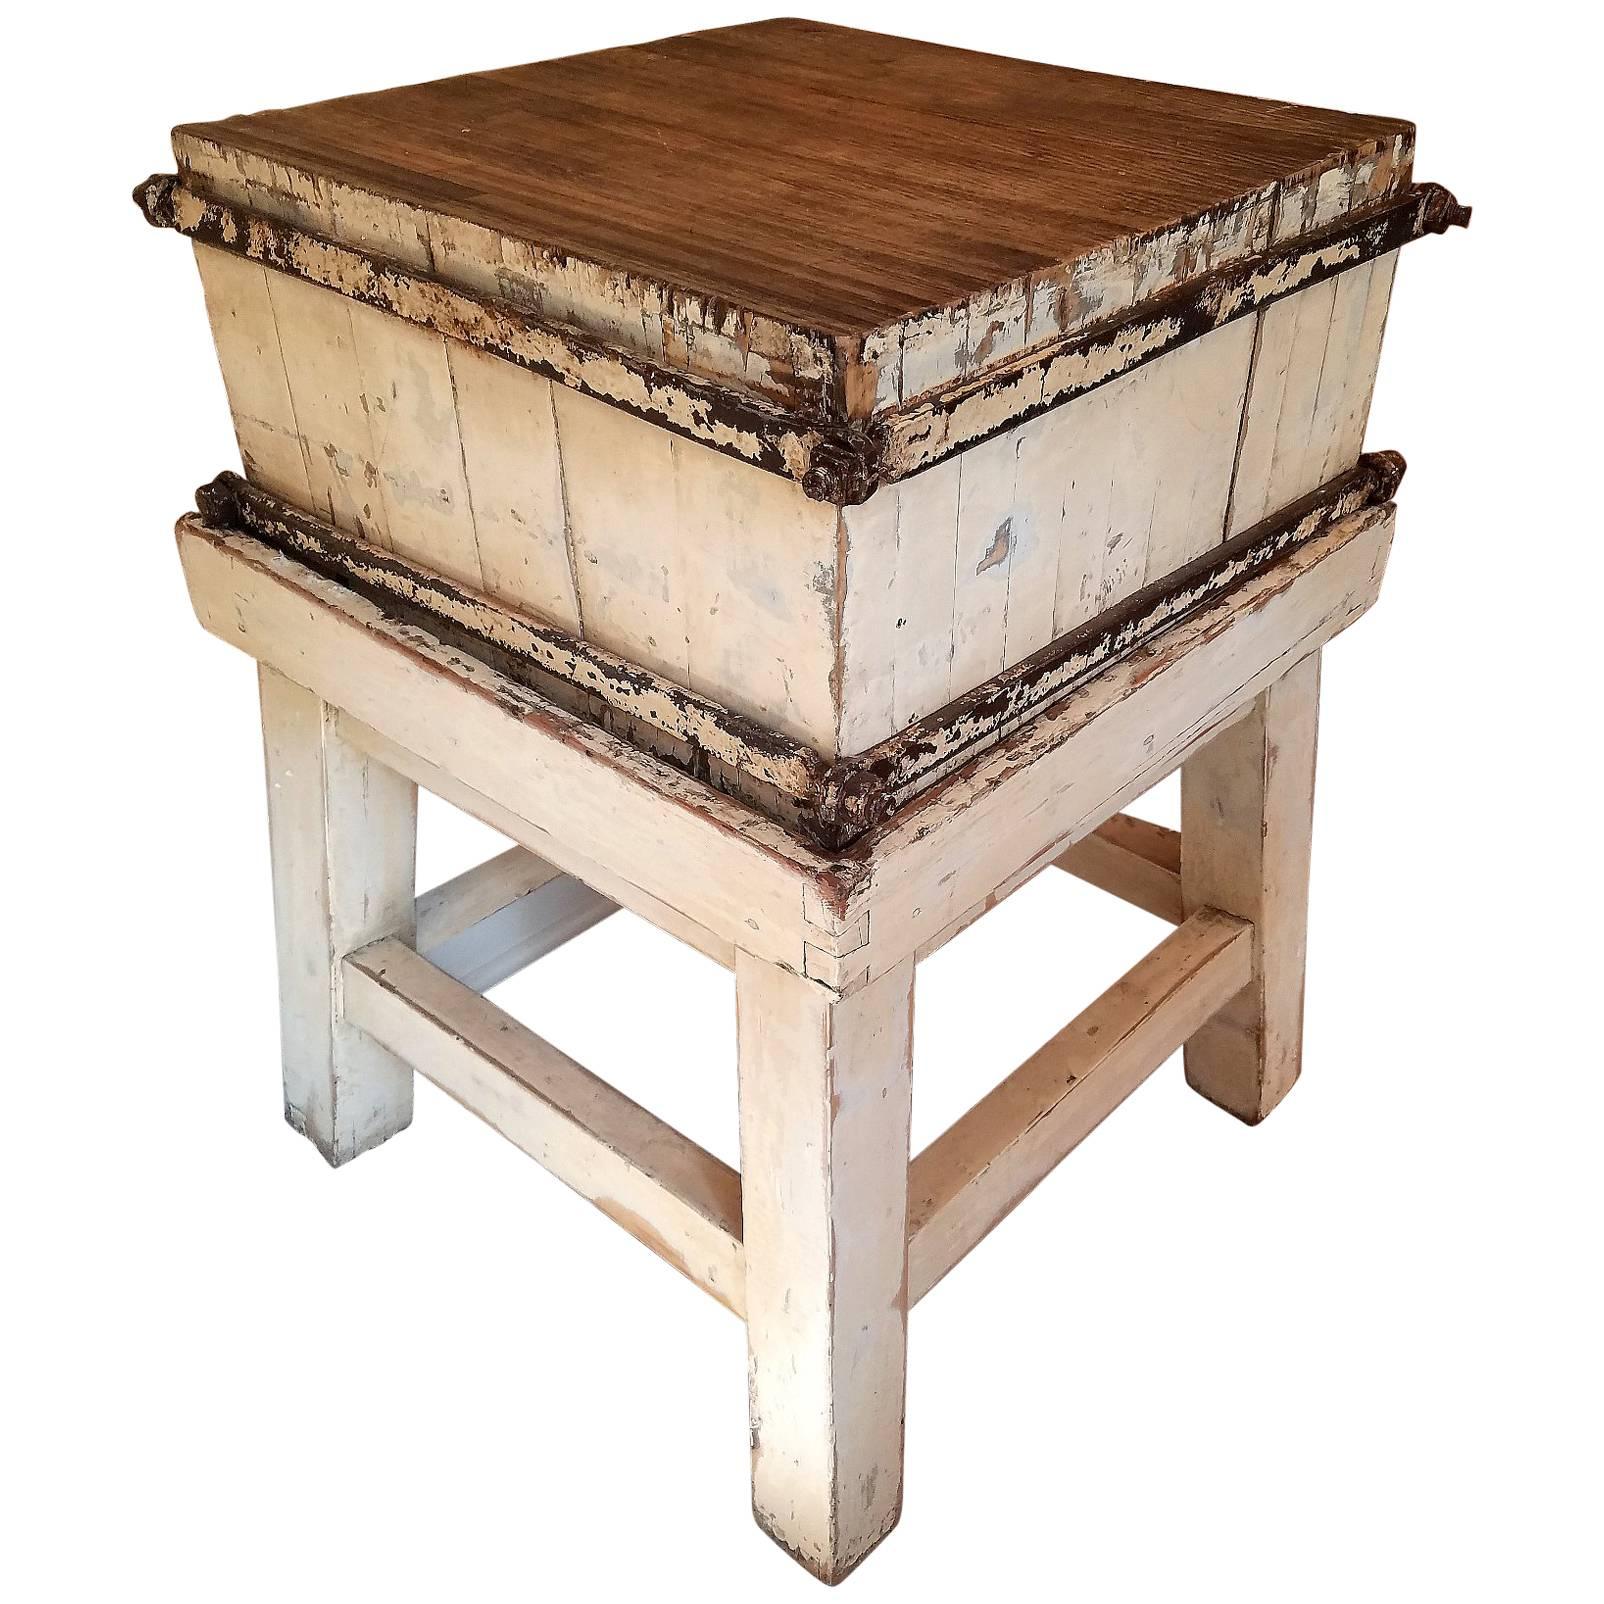 Sweet Vintage Butcher Block from France, circa 1900